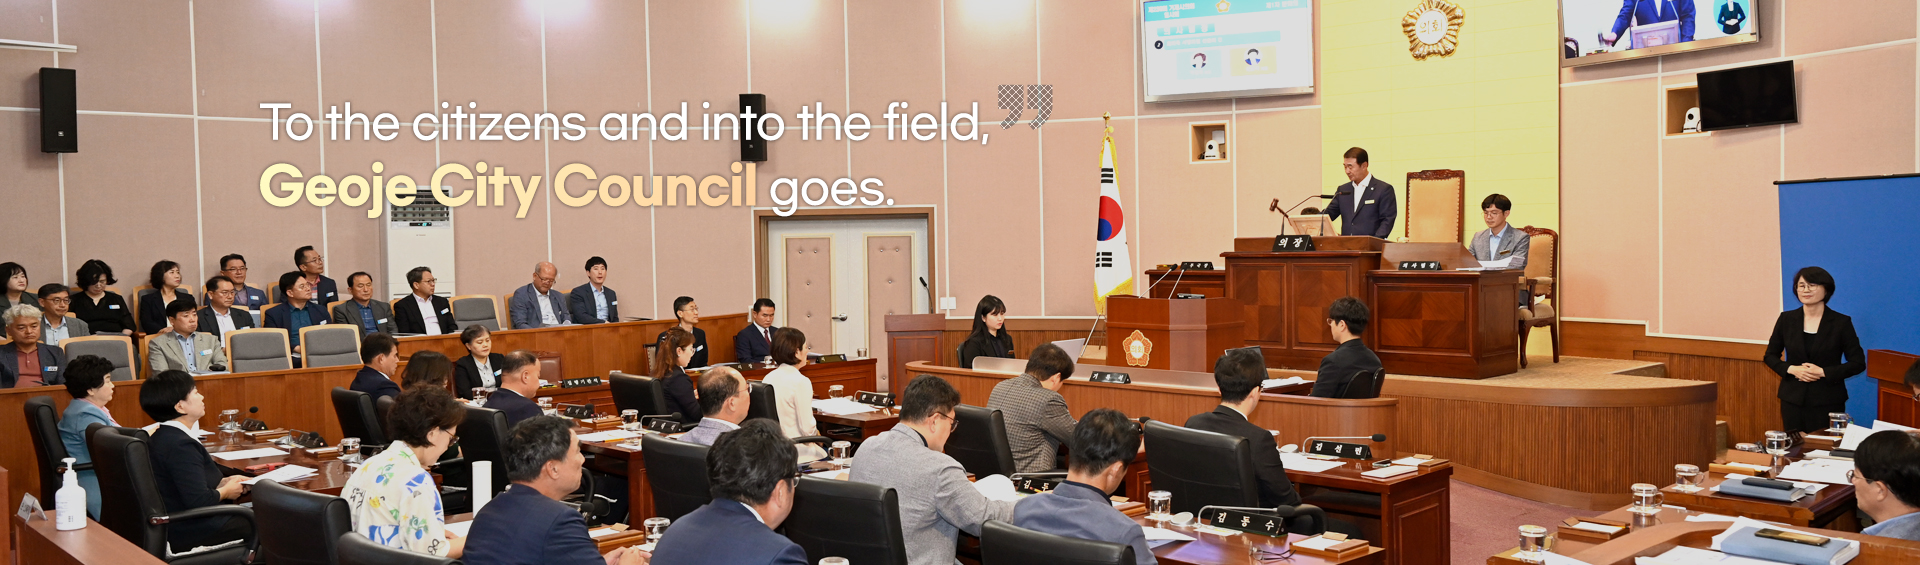 To the citizens and into the field, Geoje City Council goes.